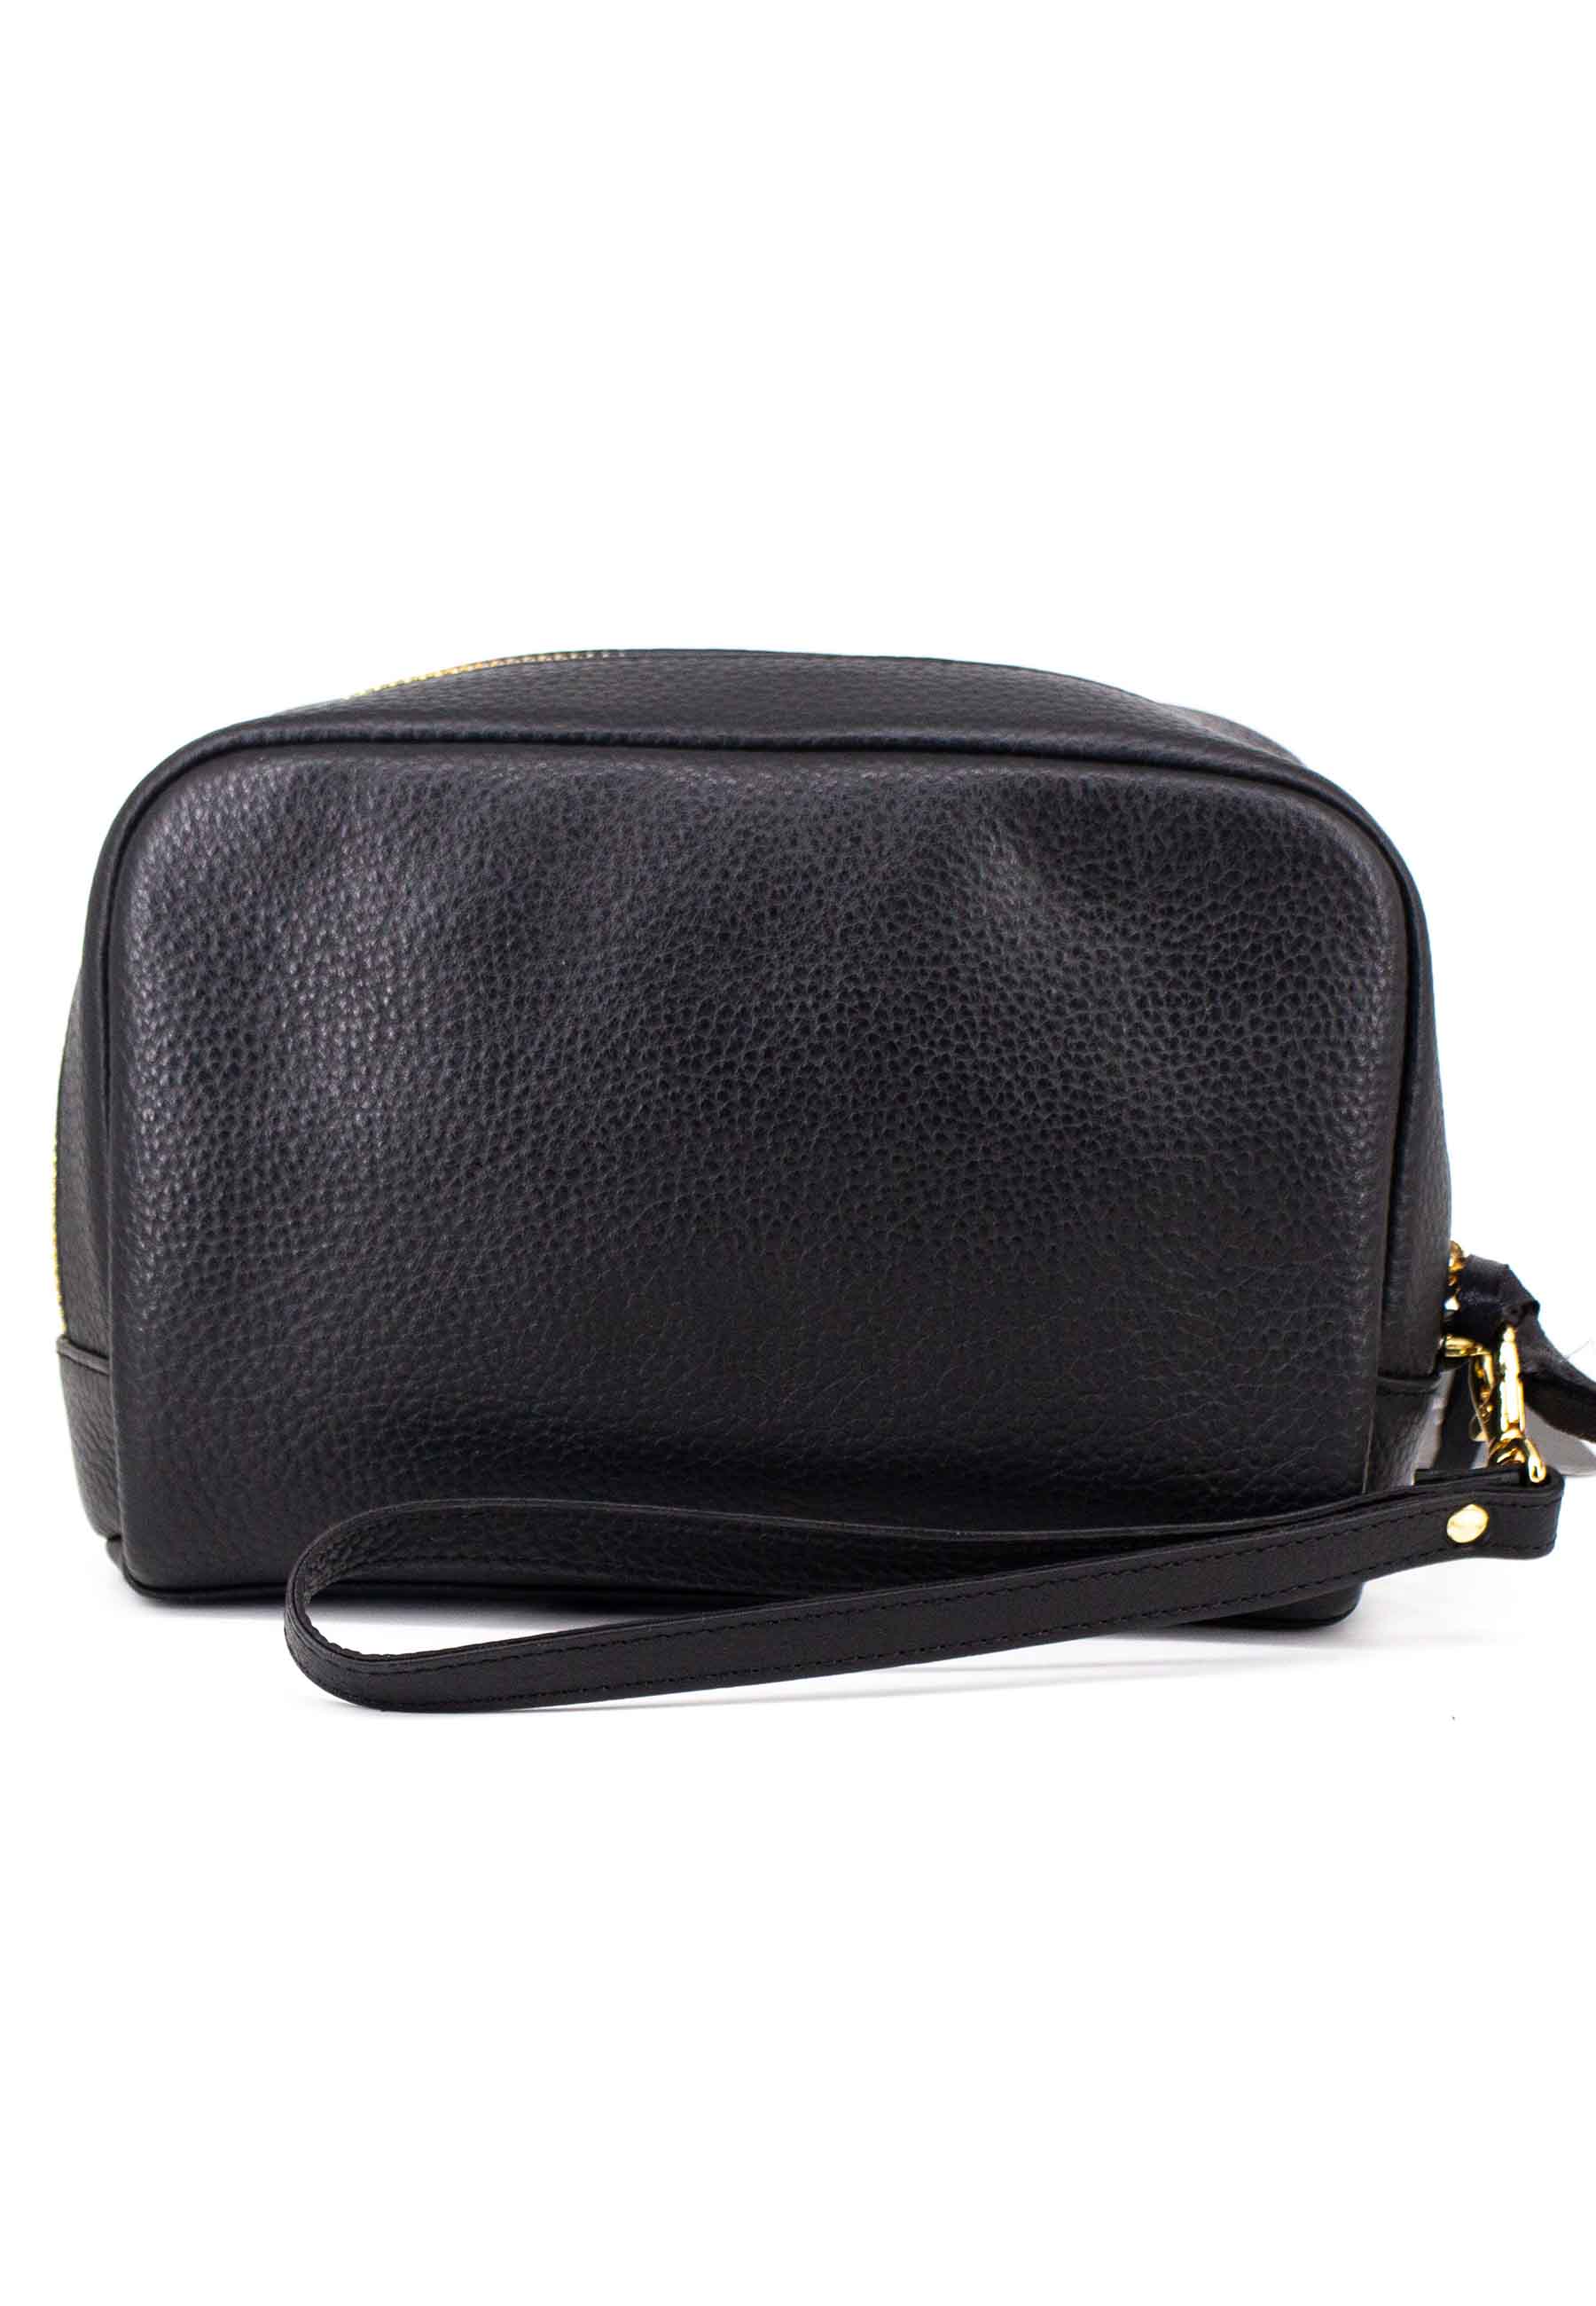 Men's black leather bag with gold zip and leather bracelet